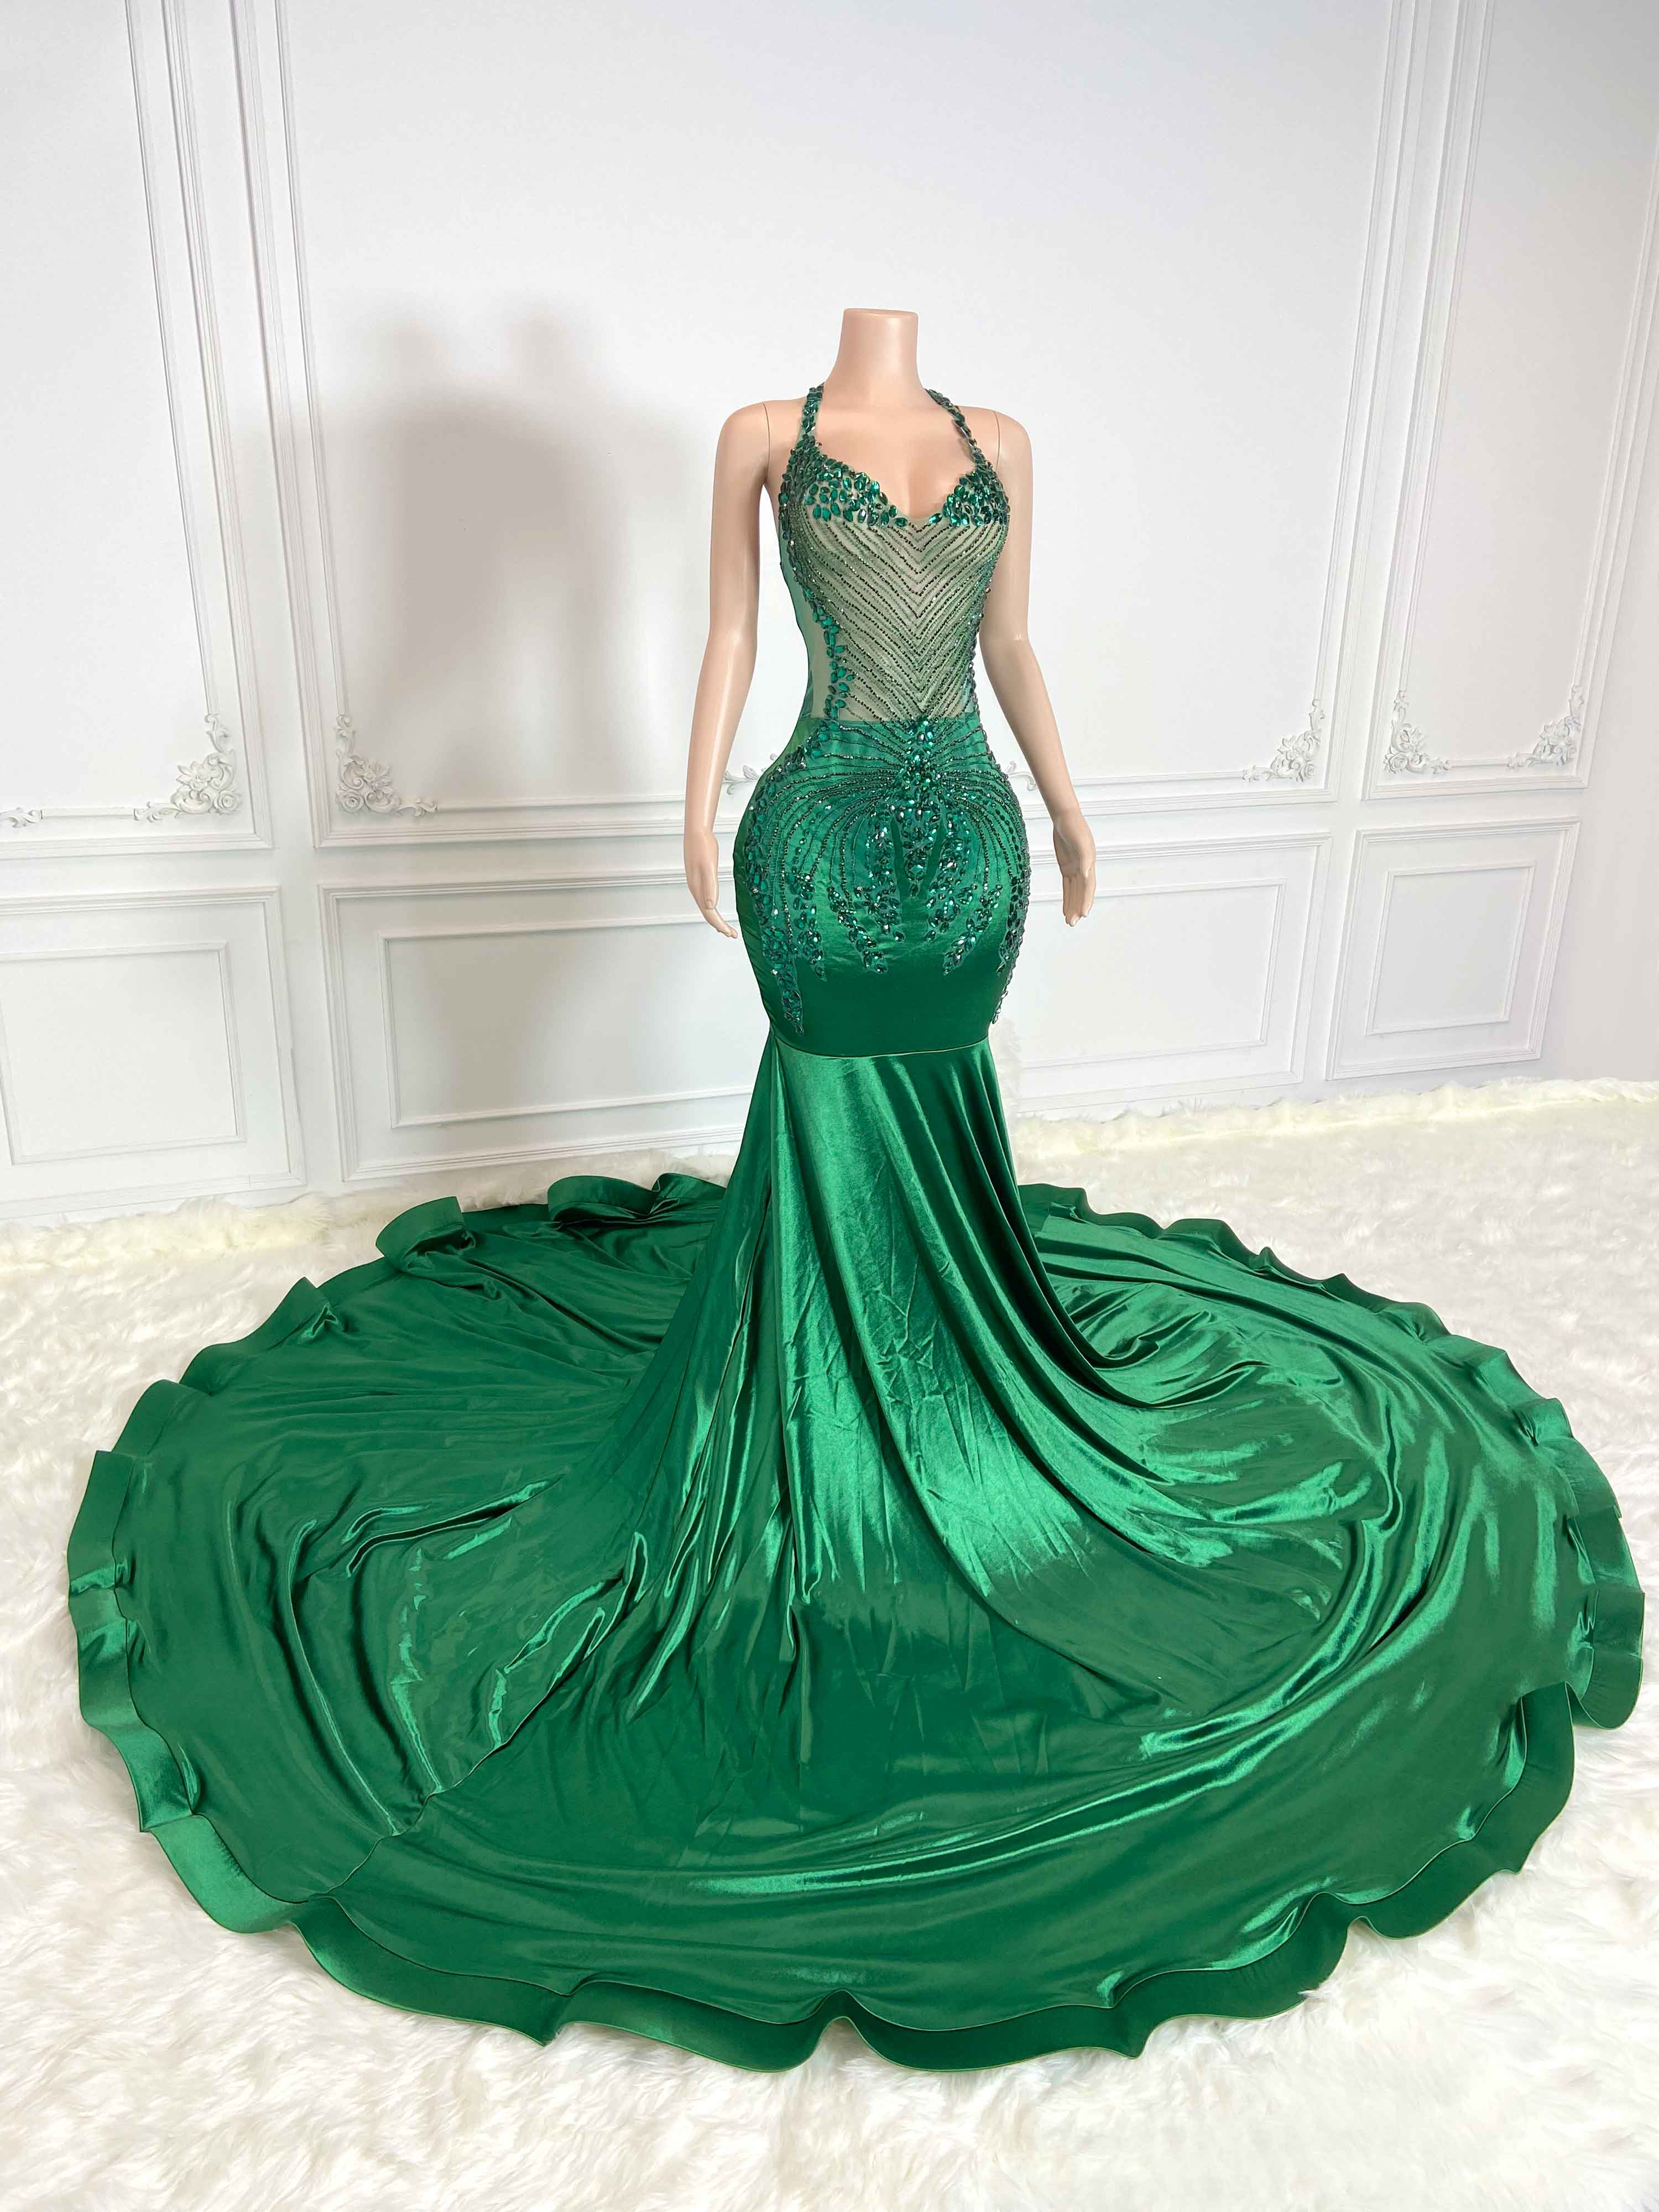 Green Low Cut and Rhinestone Sleeveless Maxi Gown